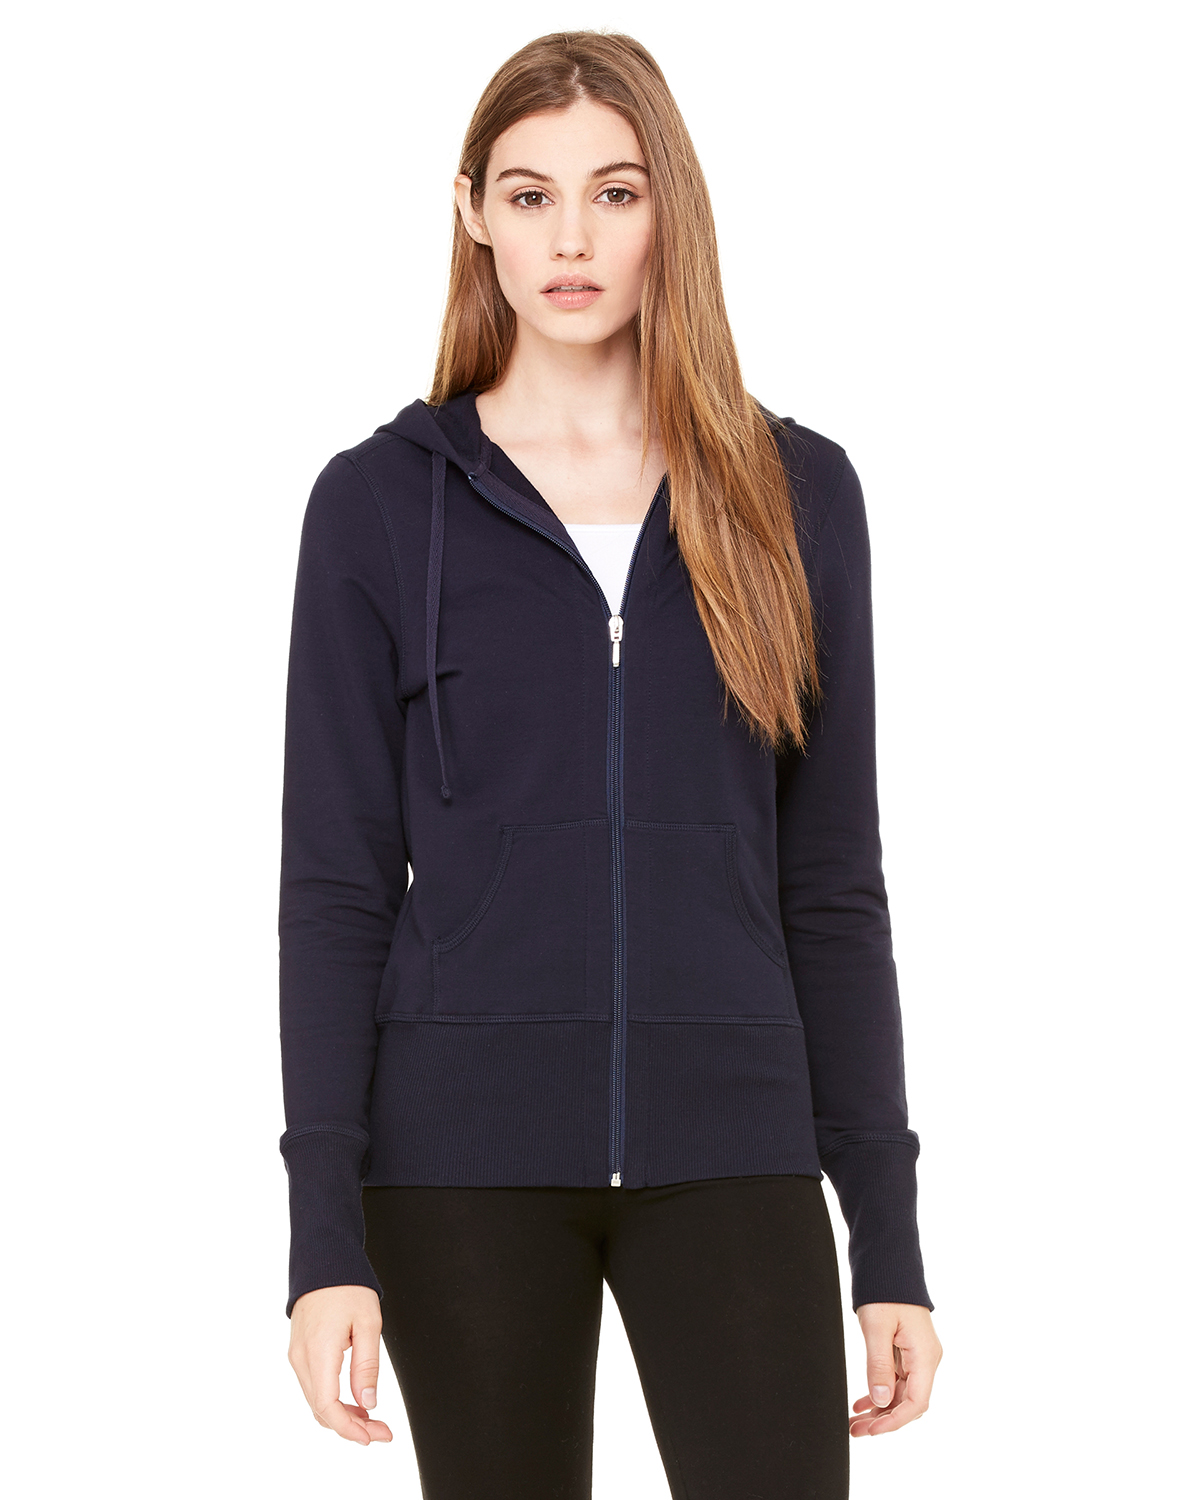 bella 7207 Ladies' French Terry Hooded Lounge Jacket